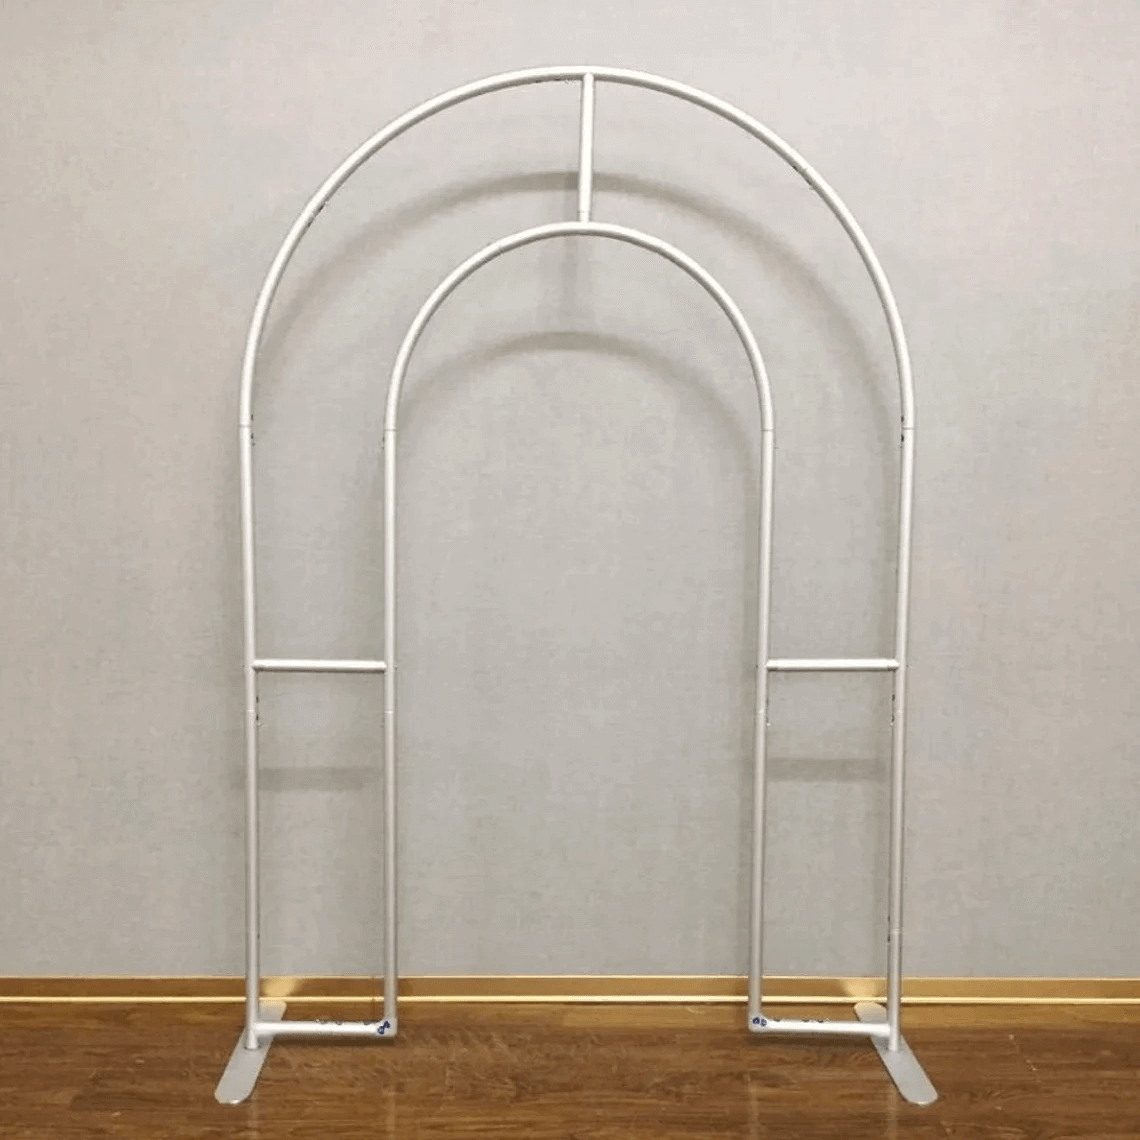 Оголена брижа Groovy Open Arch Backdrop Cover Arched Metal Stand Frame Party